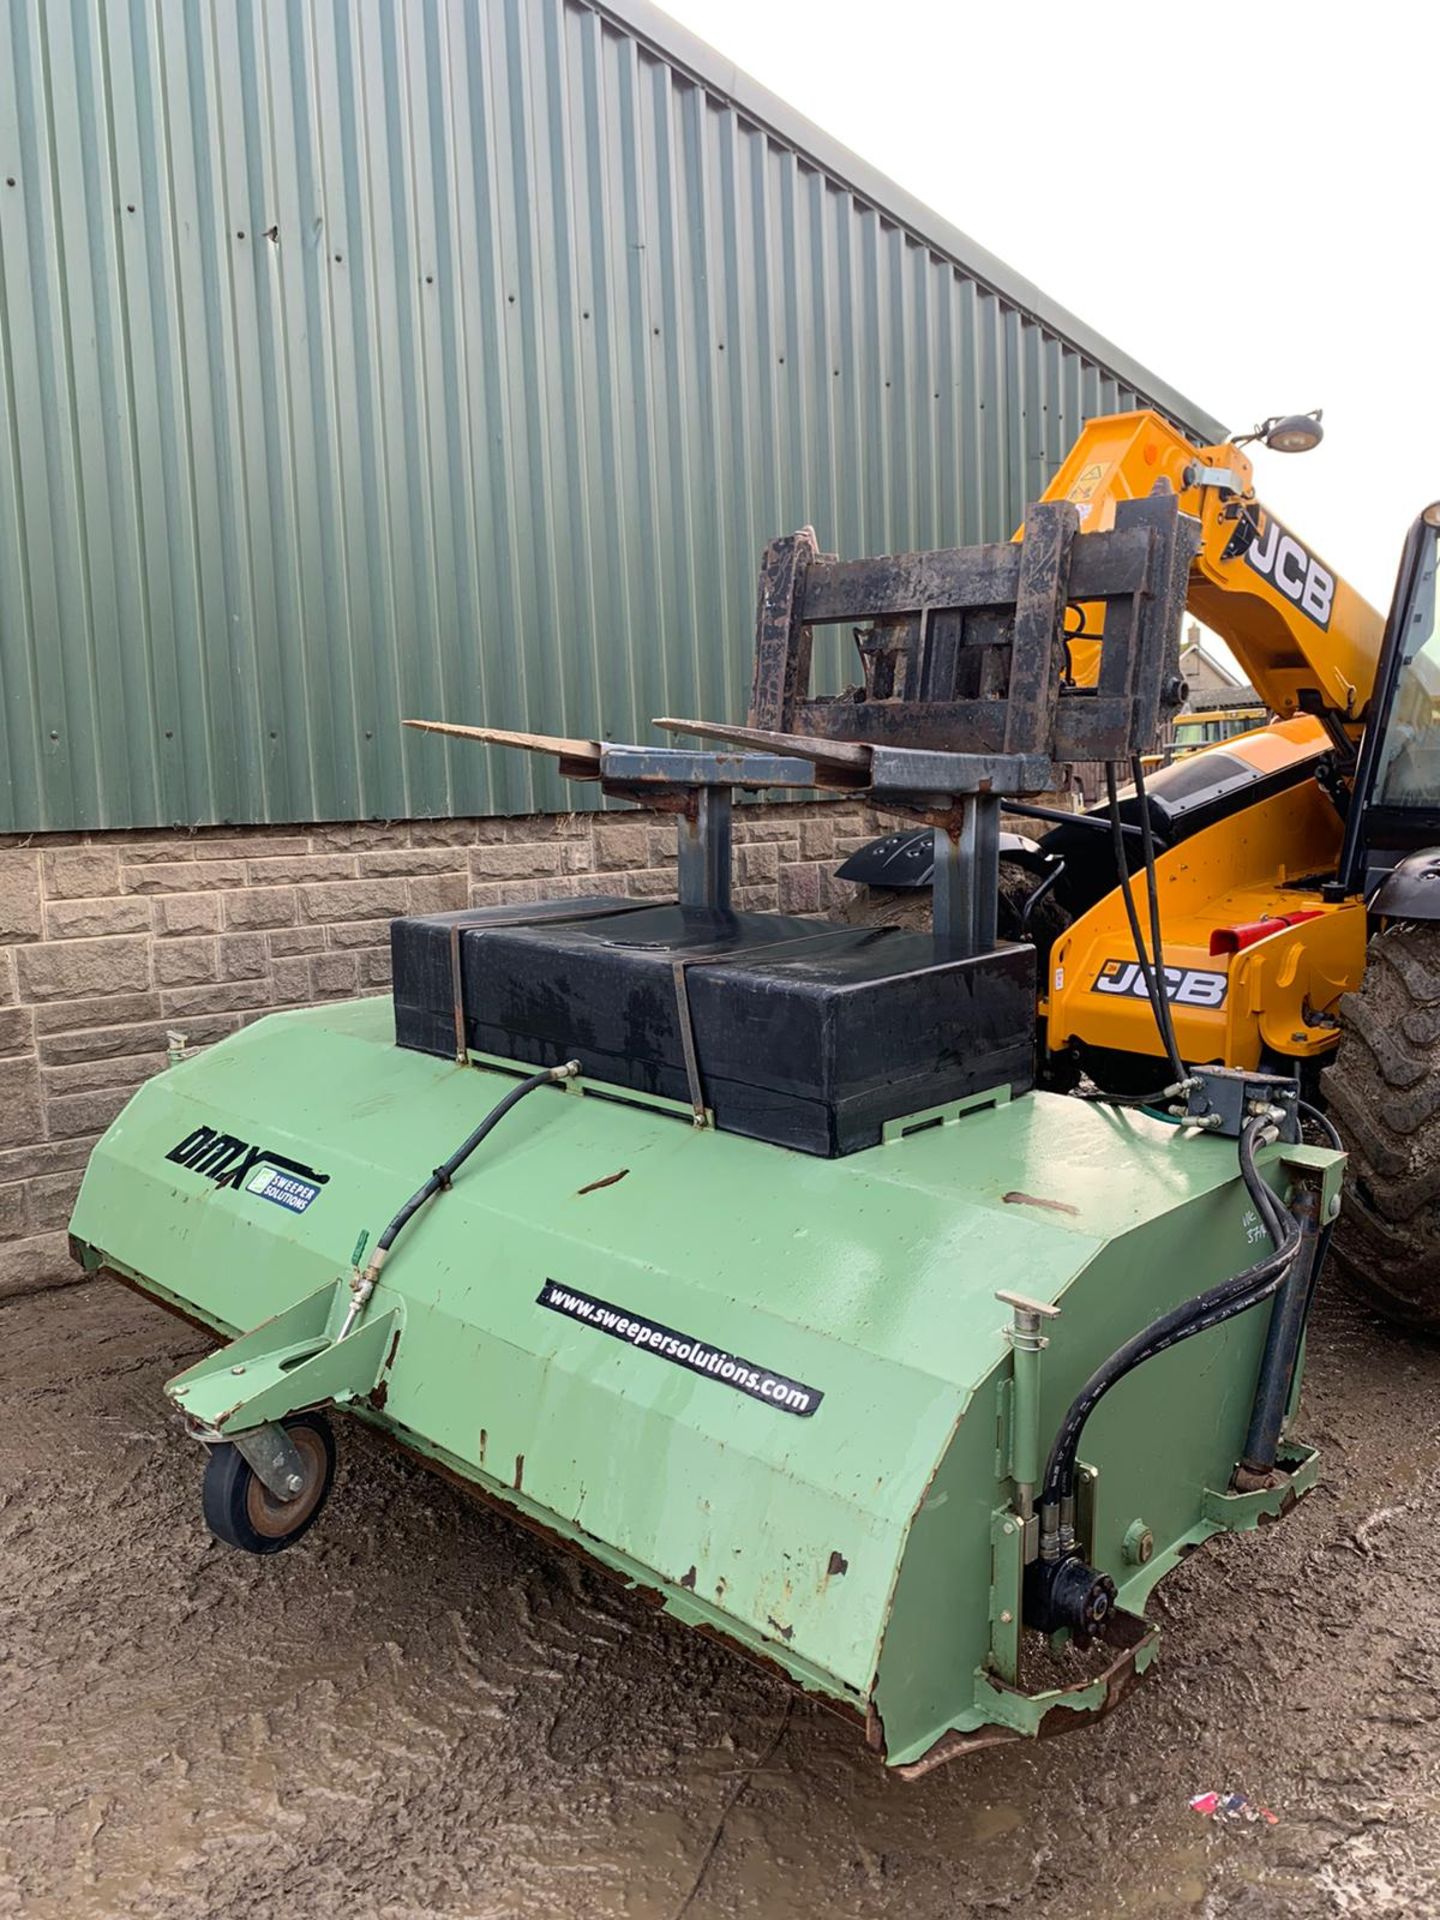 DMX SWEEPER SOLUTION SWEEPER BUCKET, ALL WORKS, CLEAN MACHINE, HYDRAULIC DRIVEN *PLUS VAT*